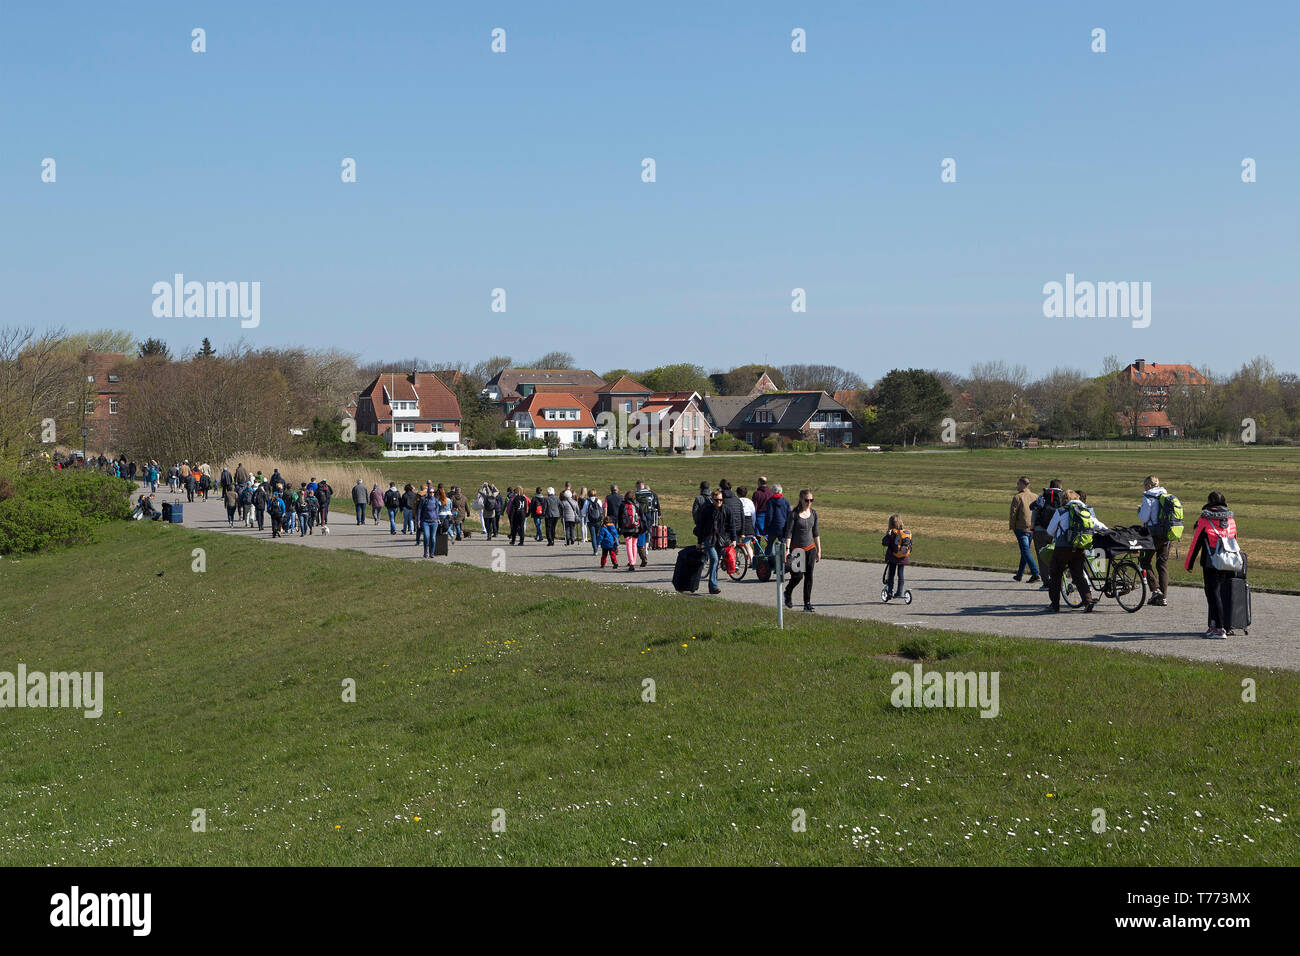 day visitors on their way from the harbour to the village, Spiekeroog Island, East Friesland, Lower Saxony, Germany Stock Photo